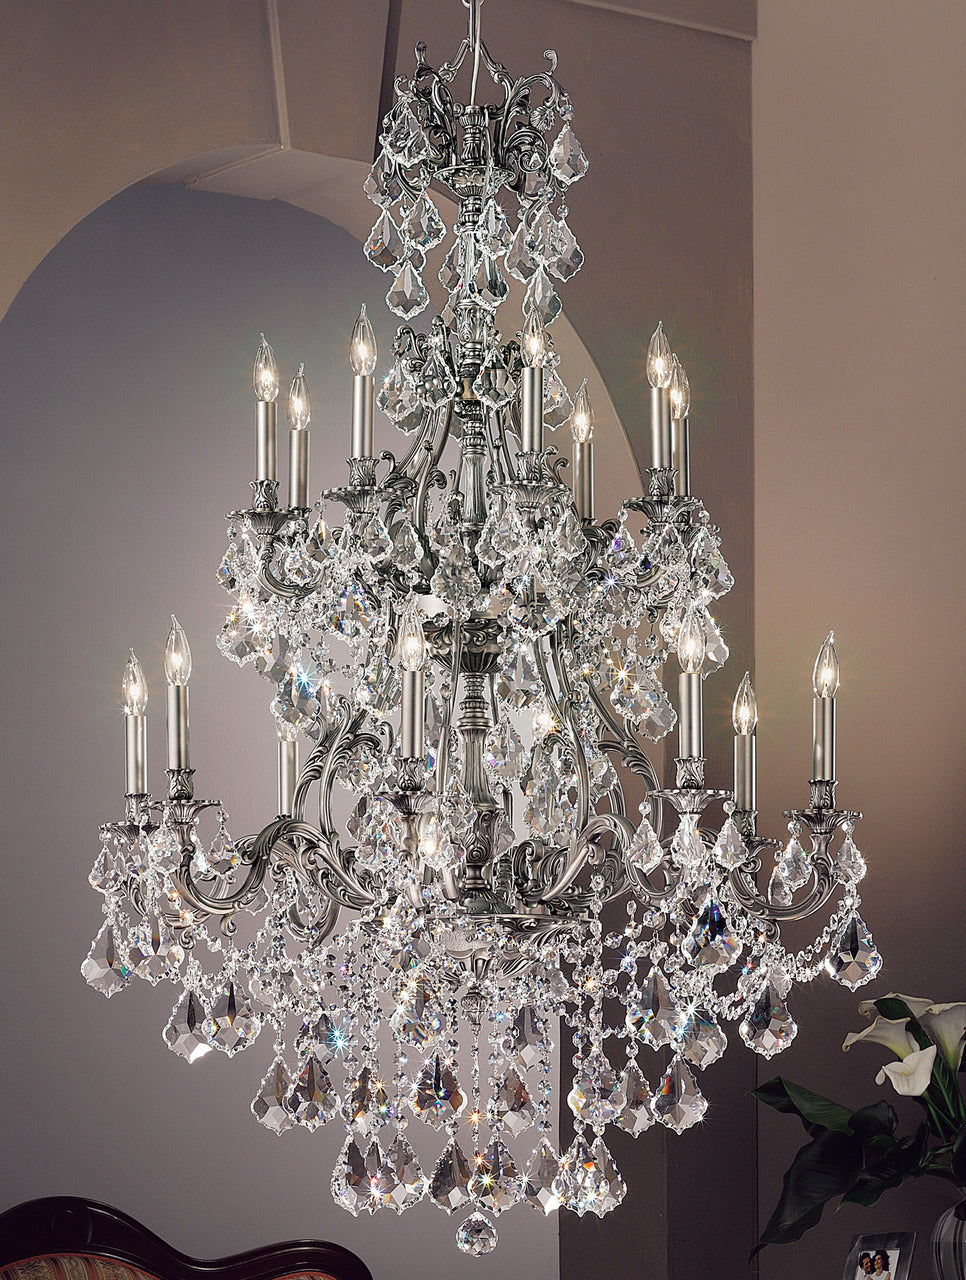 Classic Lighting 57357 AGP CBK Majestic Imperial Crystal Chandelier in Aged Pewter (Imported from Spain)